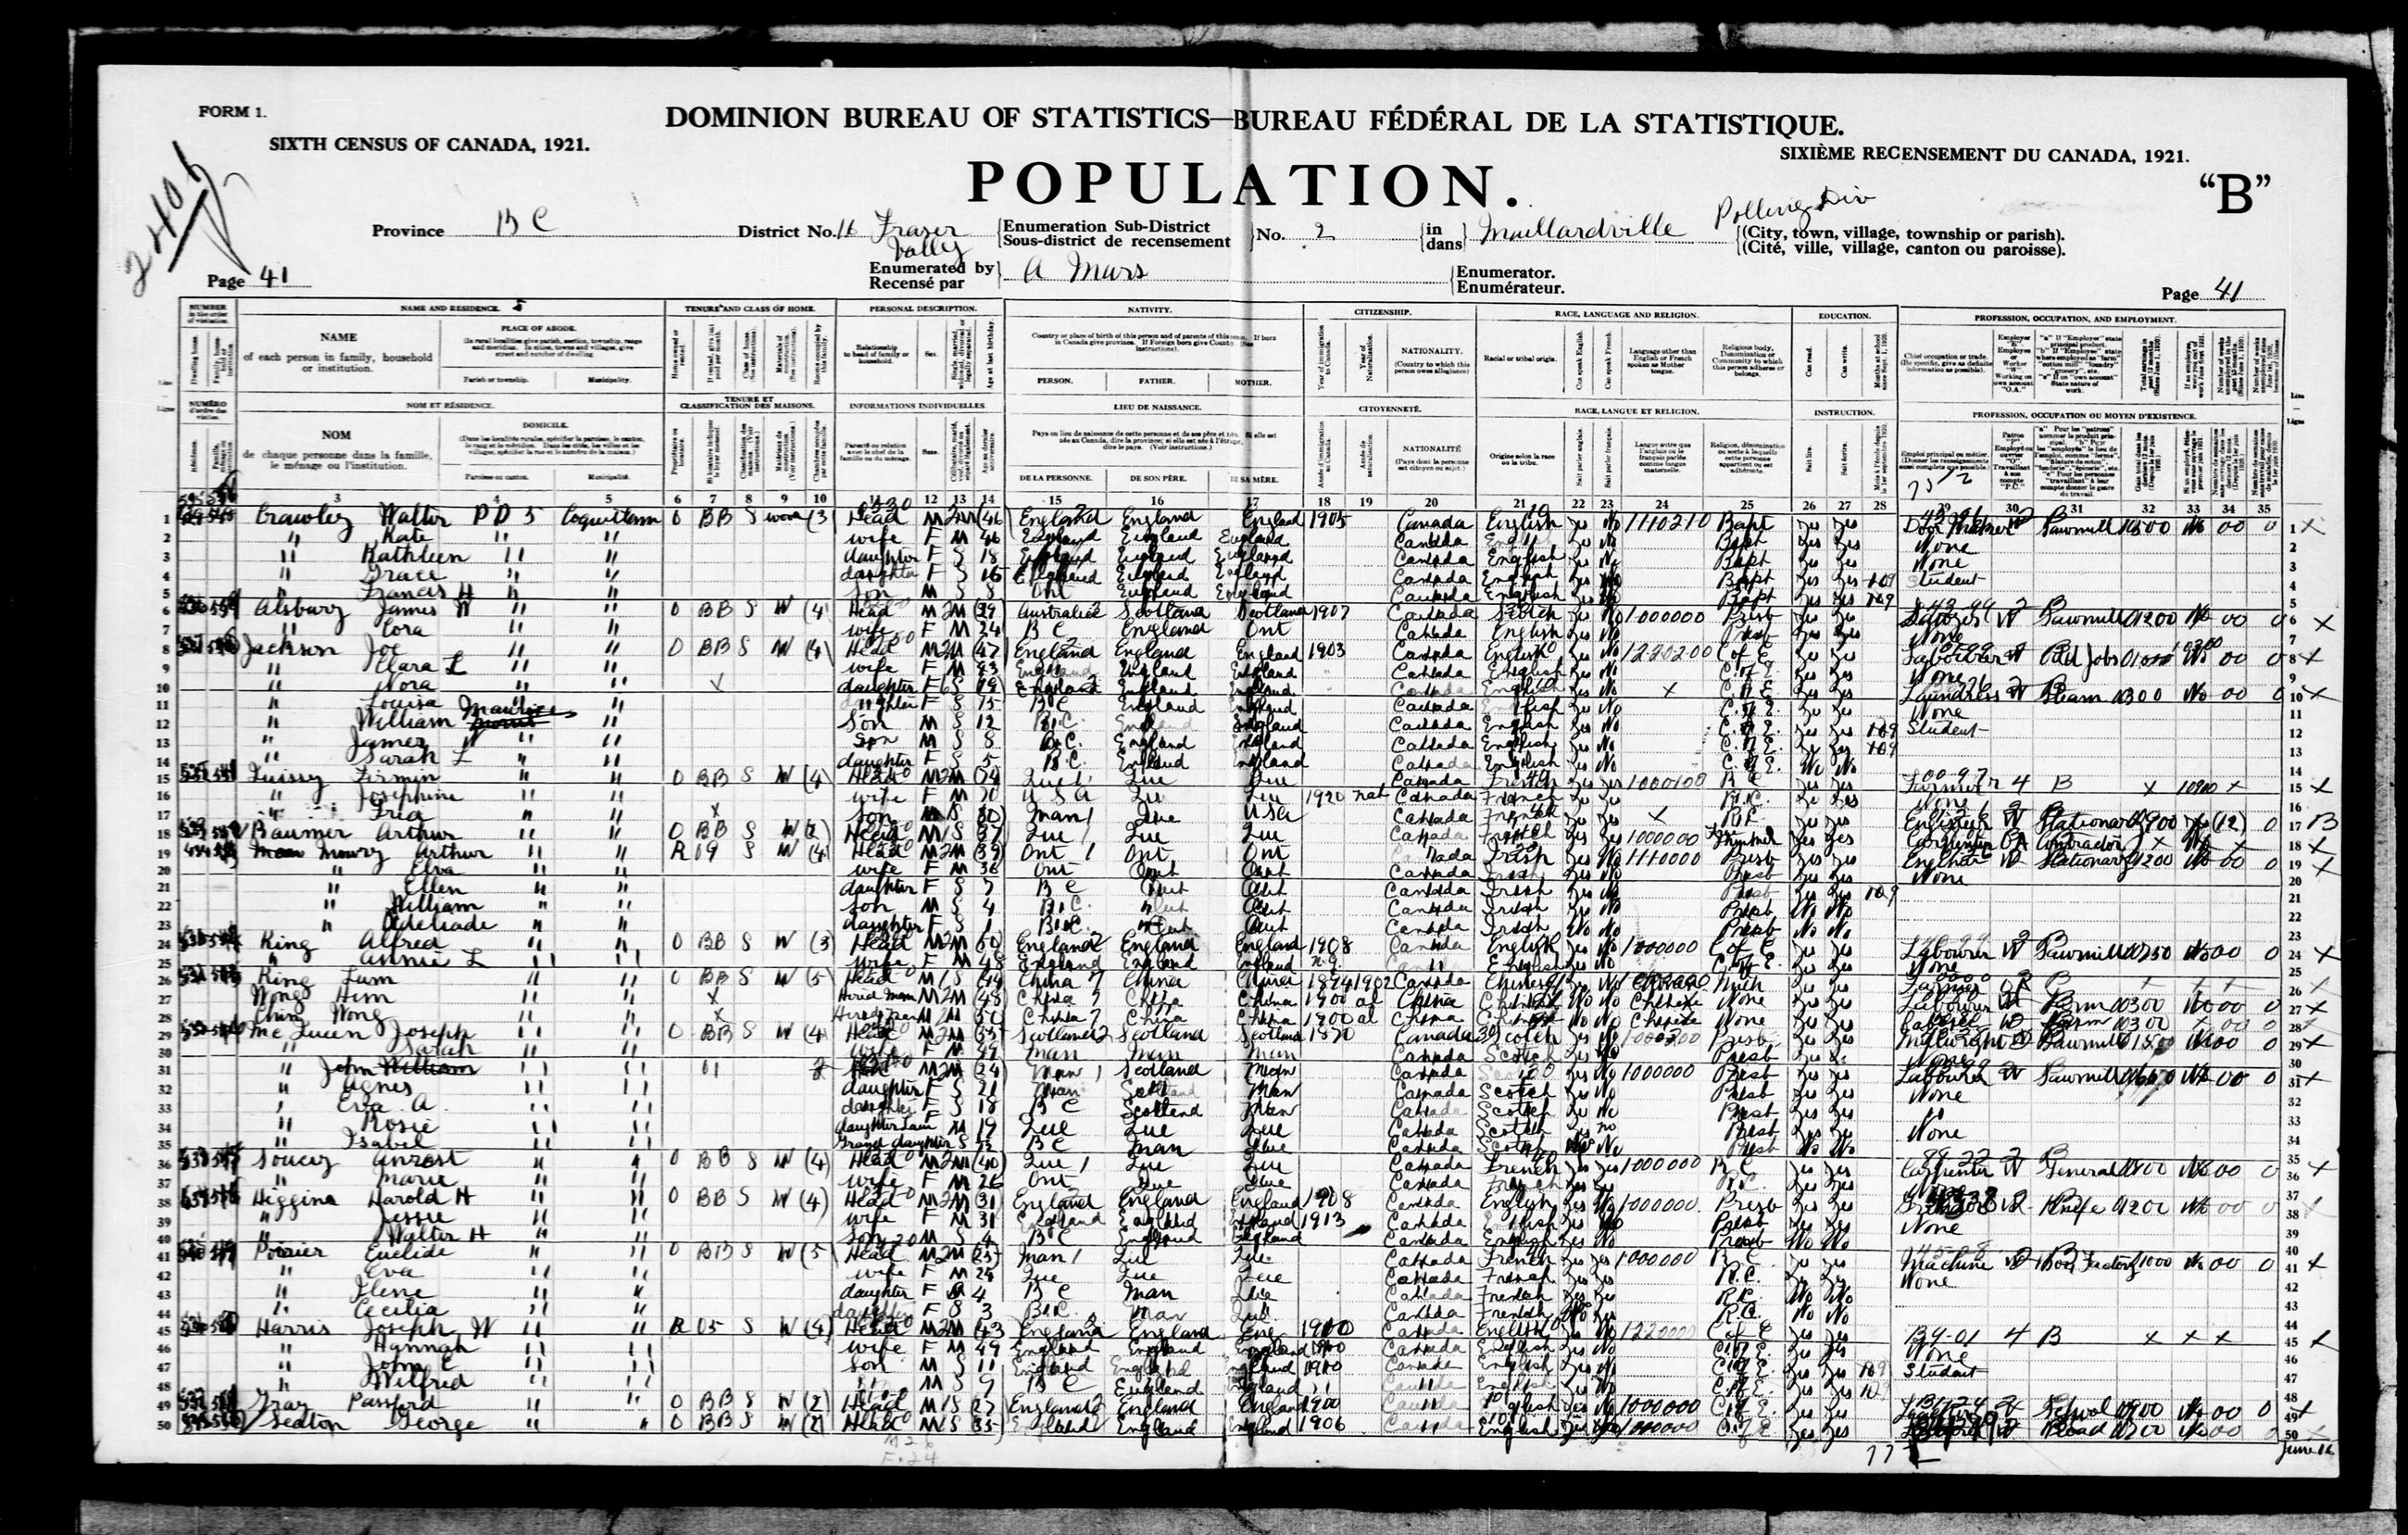 20 - 1921 Census - James Alsbury and Cora Munday (Source Library and Archives Canada Item  4450059)